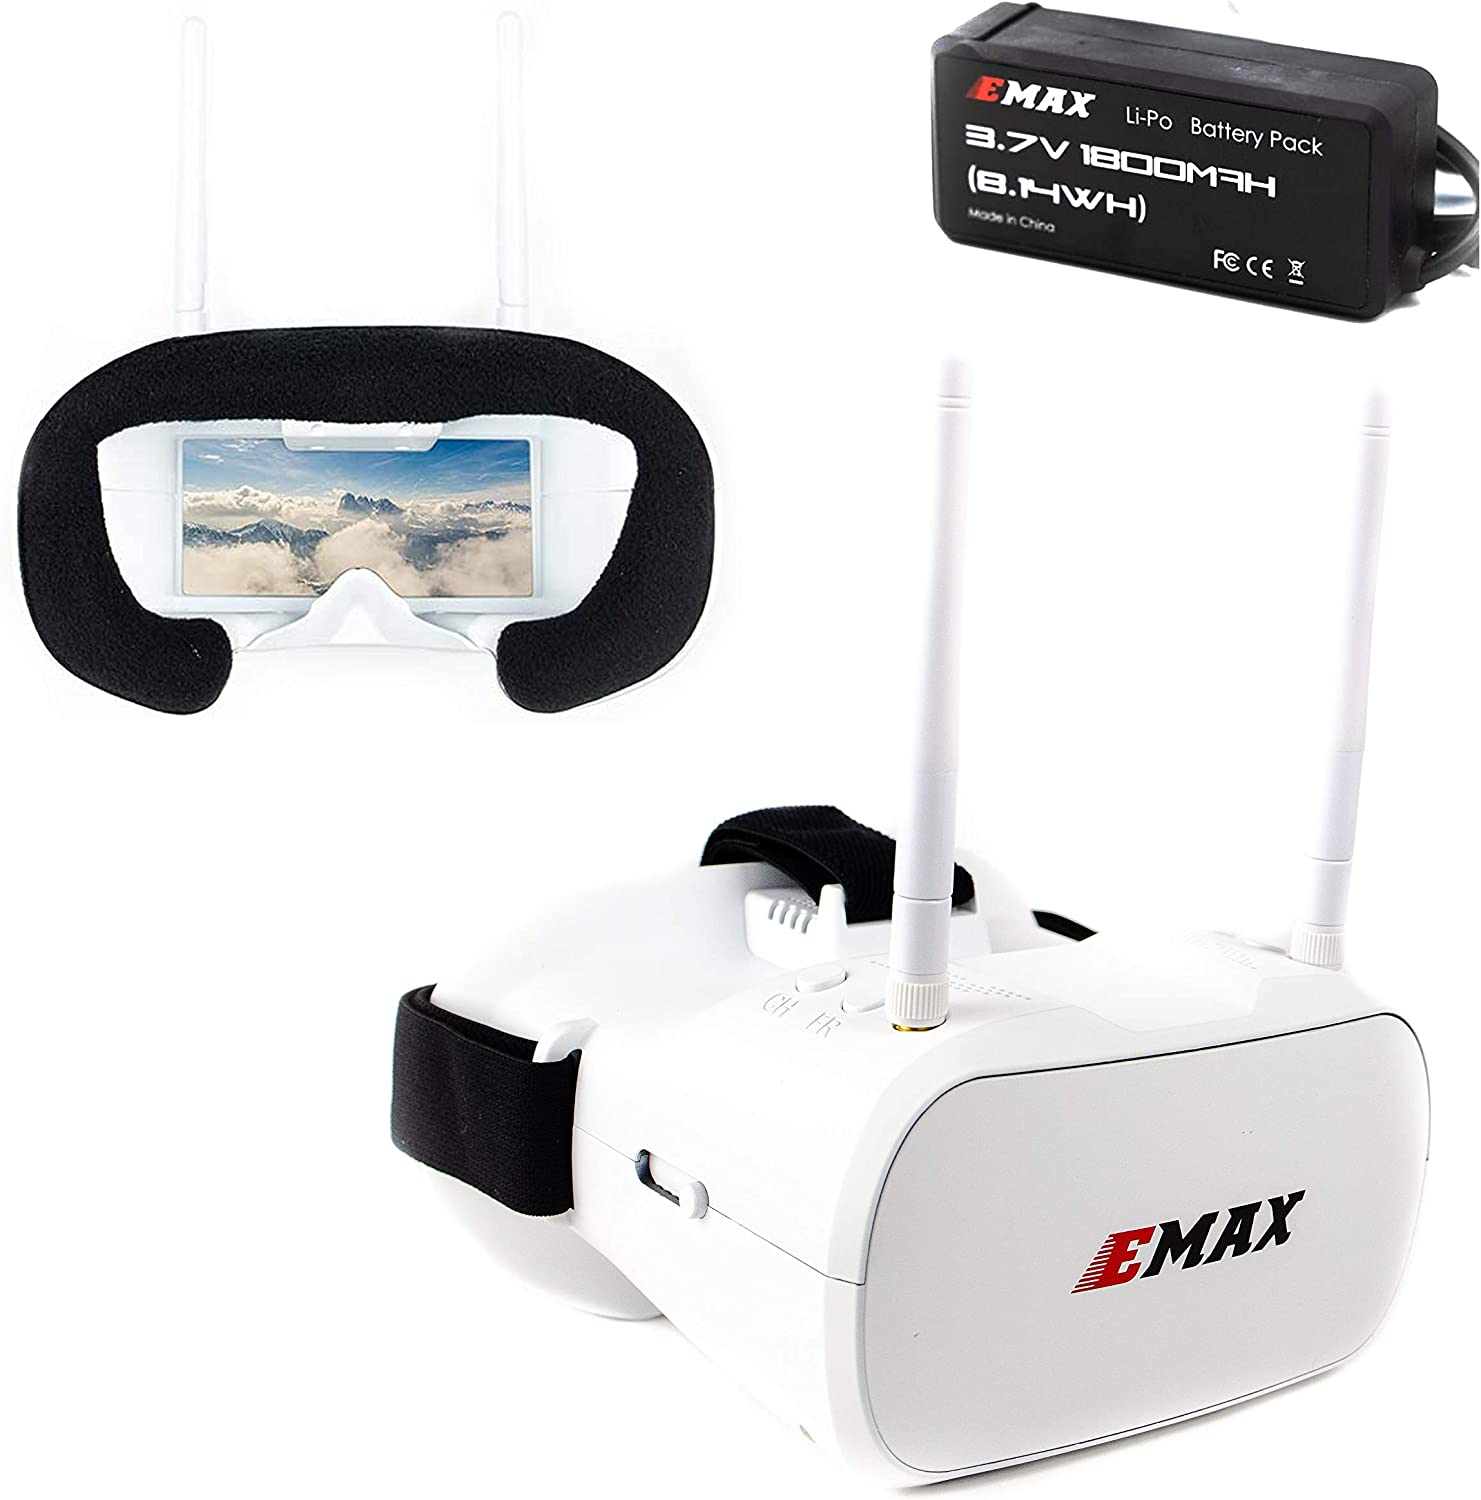 EMAX Transporter FPV Boxed Goggles 5.8G For Racing Drone Diversity Tinyhawk 5 Inch Quads Racing Drone Goggles